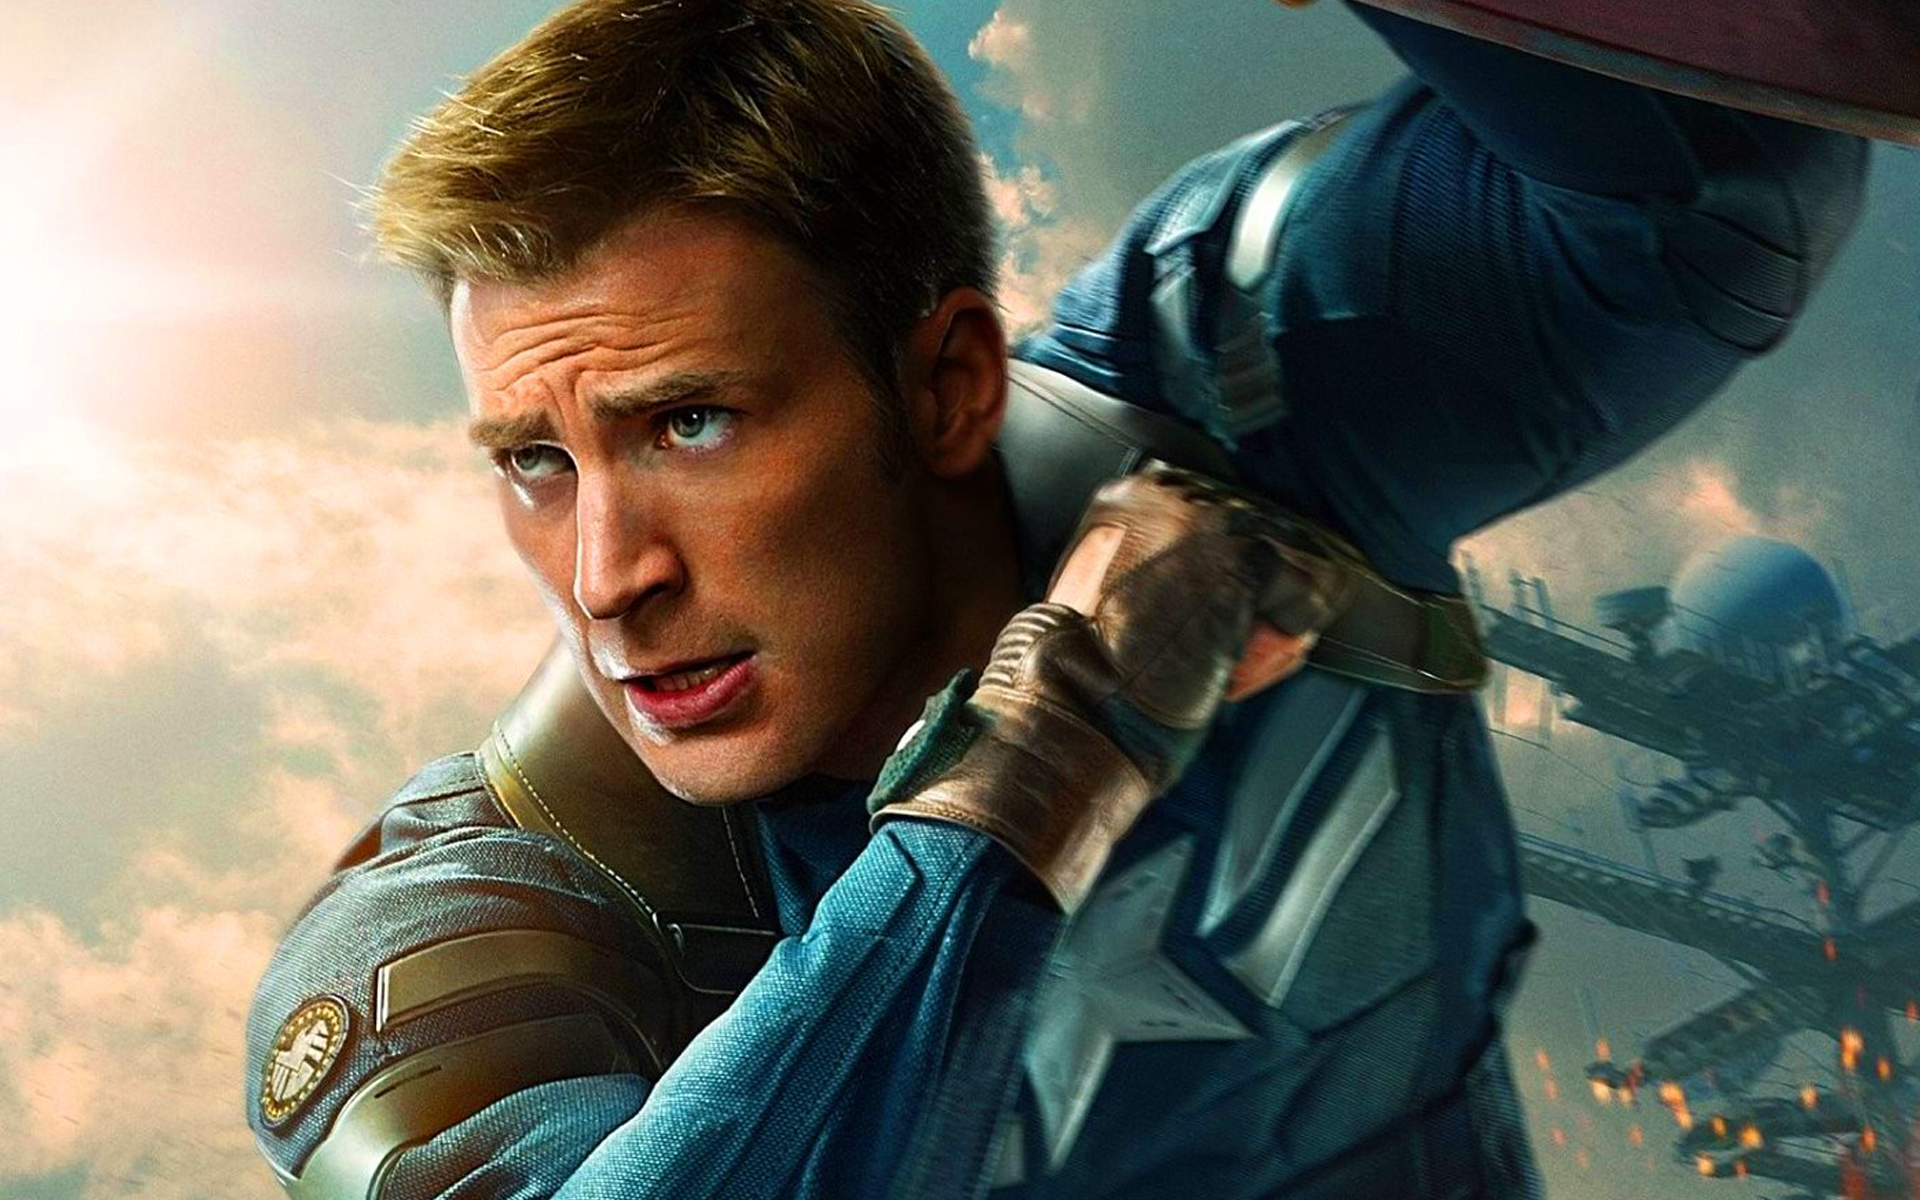 chris evans as captain america 2 the winter soldier movie 2014 hd 